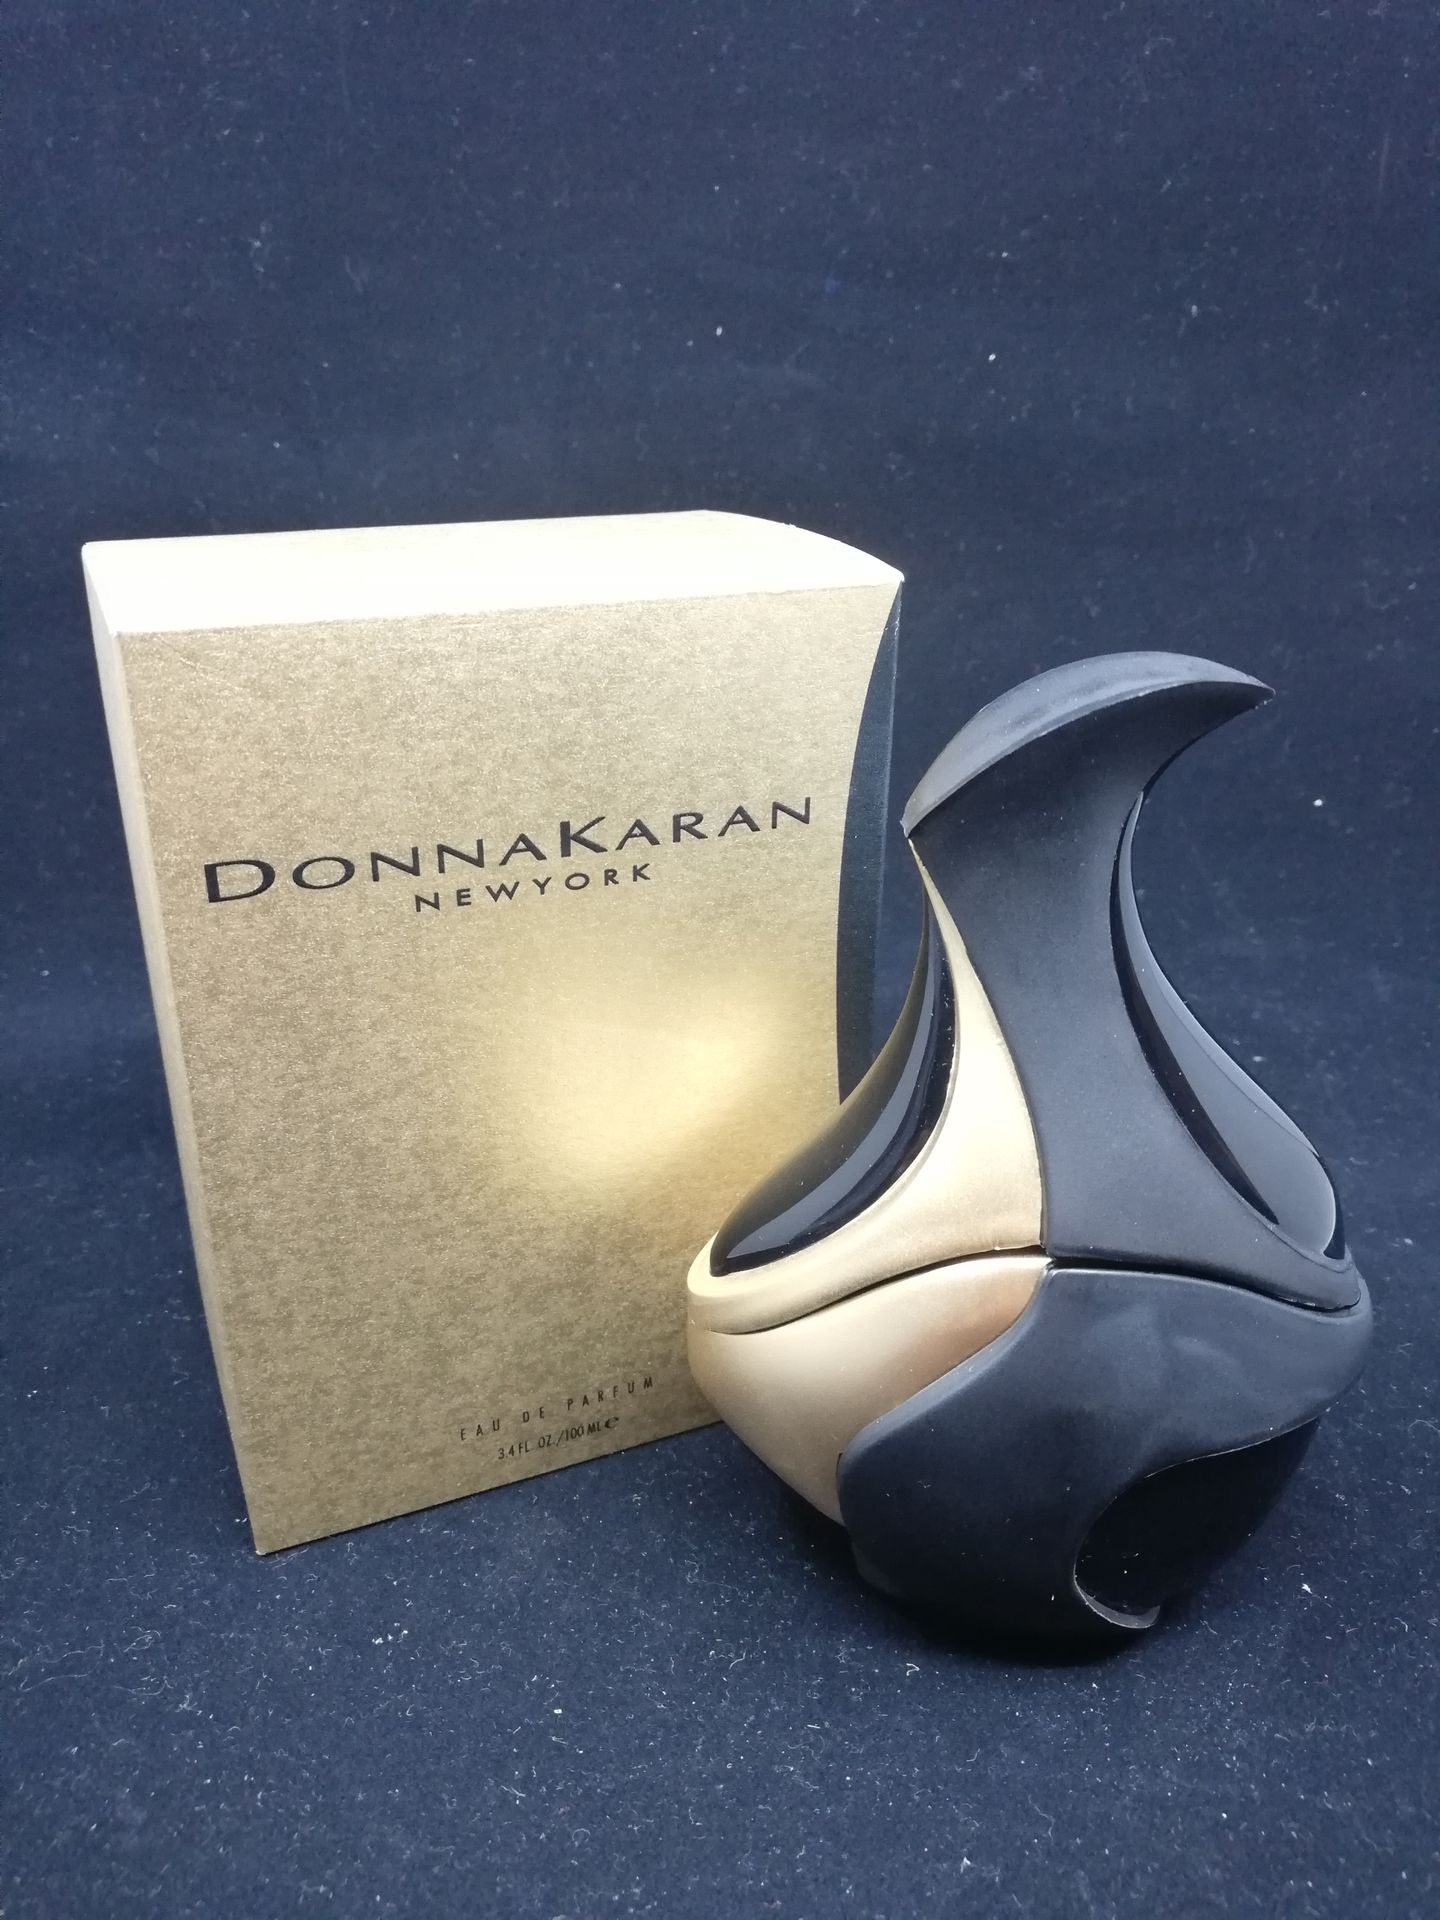 Null Donna Karan - "Pour Femme" - (1992)

Presented in a gold and black cardboar&hellip;